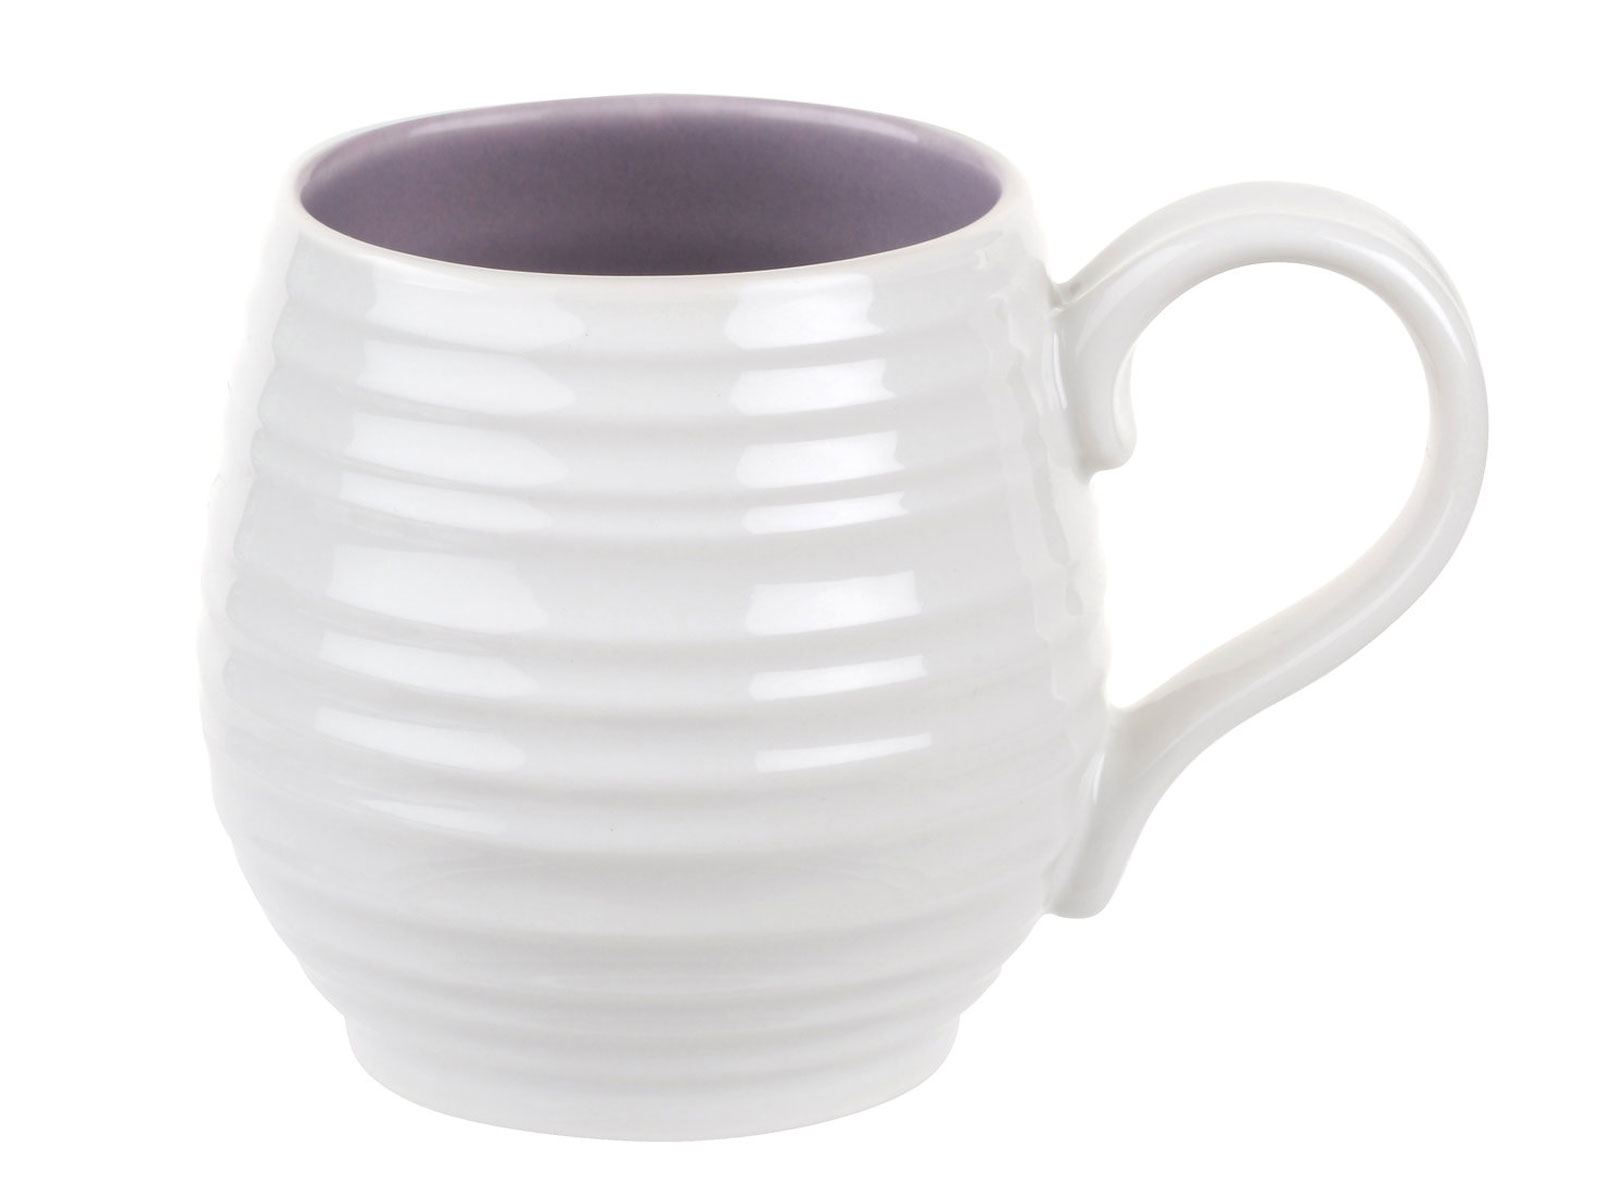 The Sophie Conran for Portmeirion Mulberry Honey Pot Mug is a white porcelain mug with a rippled texture and a pale purple interior